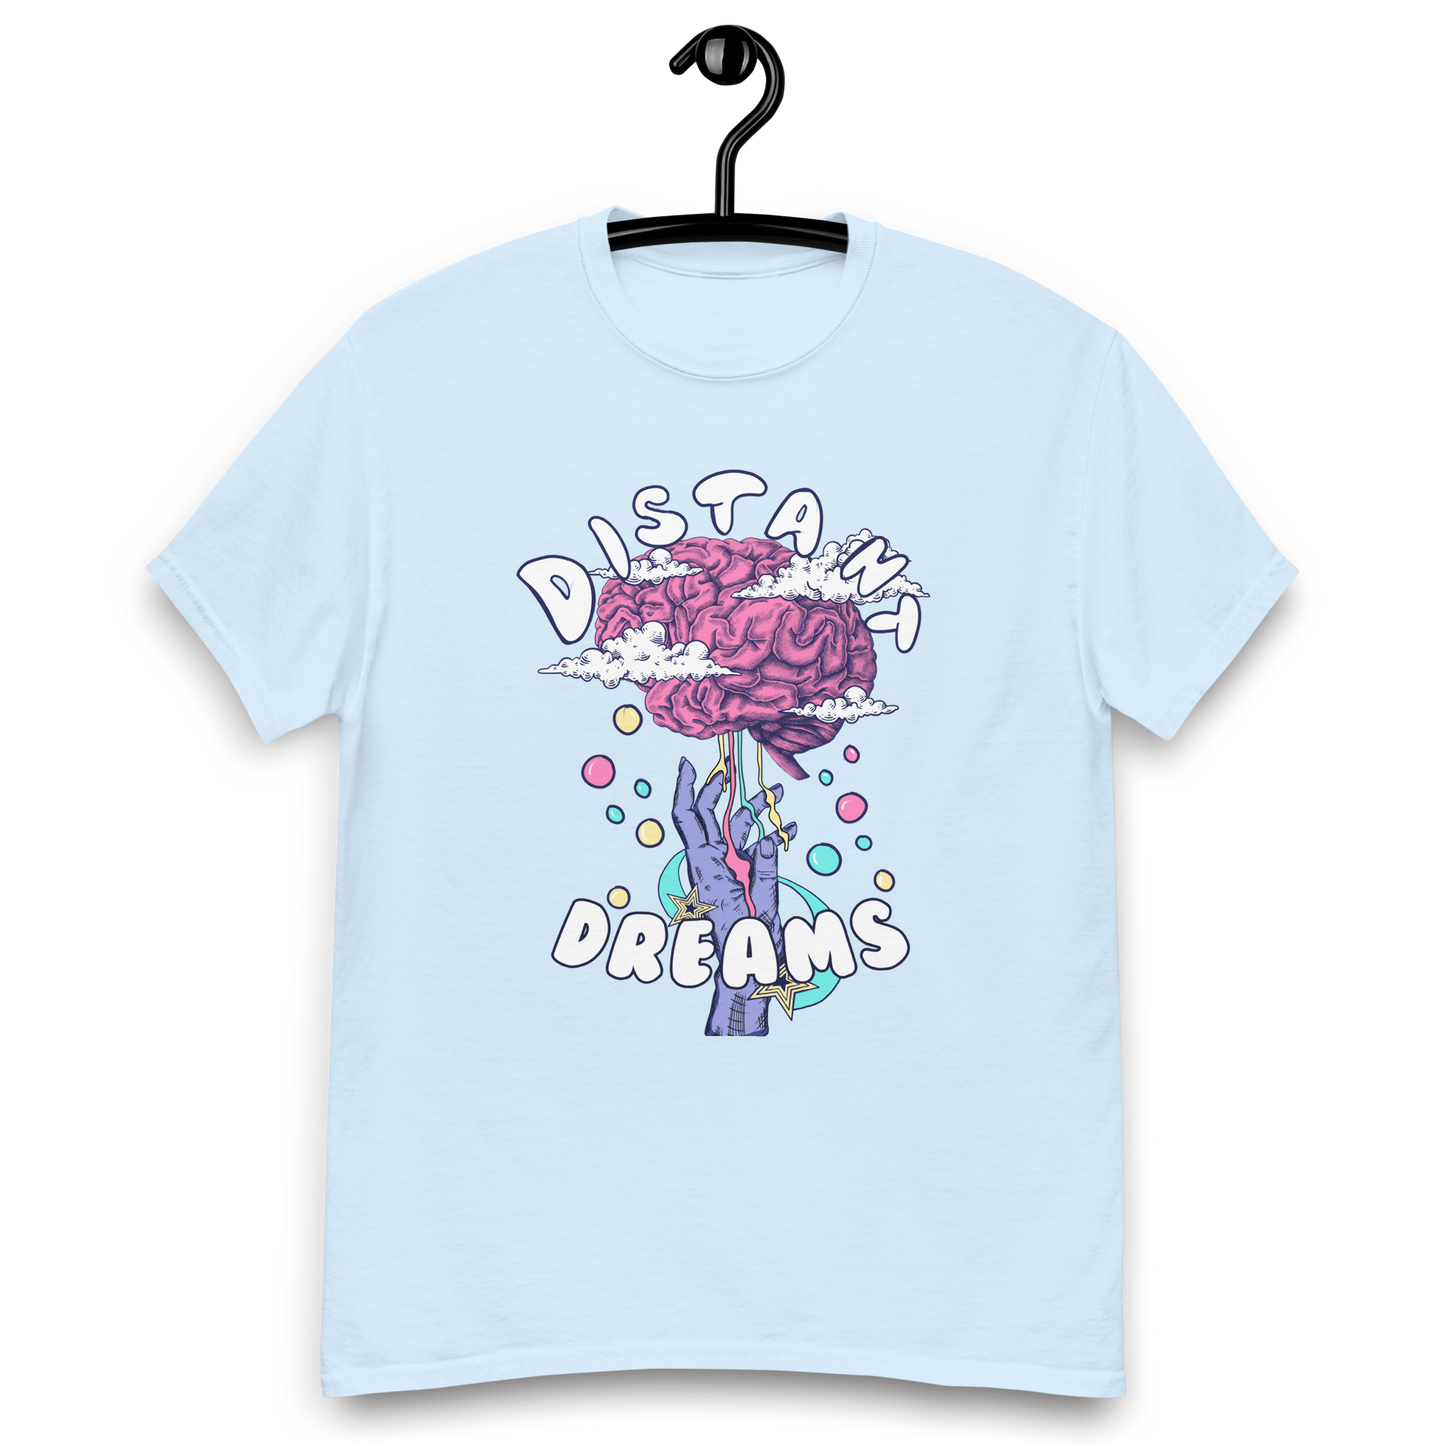 Distant Dreams Graphic Tee